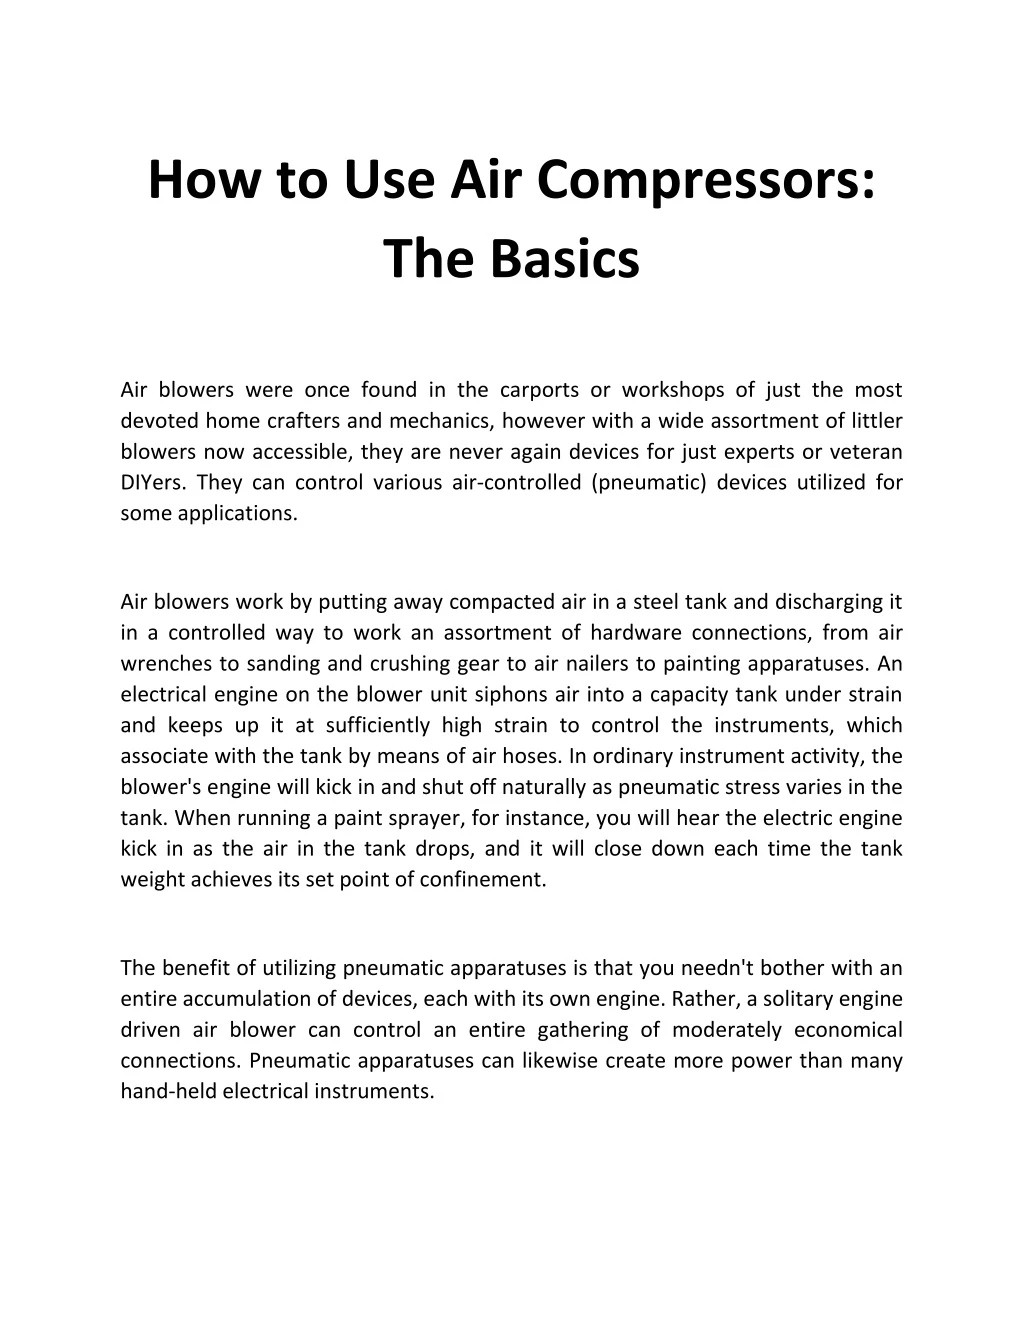 how to use air compressors the basics